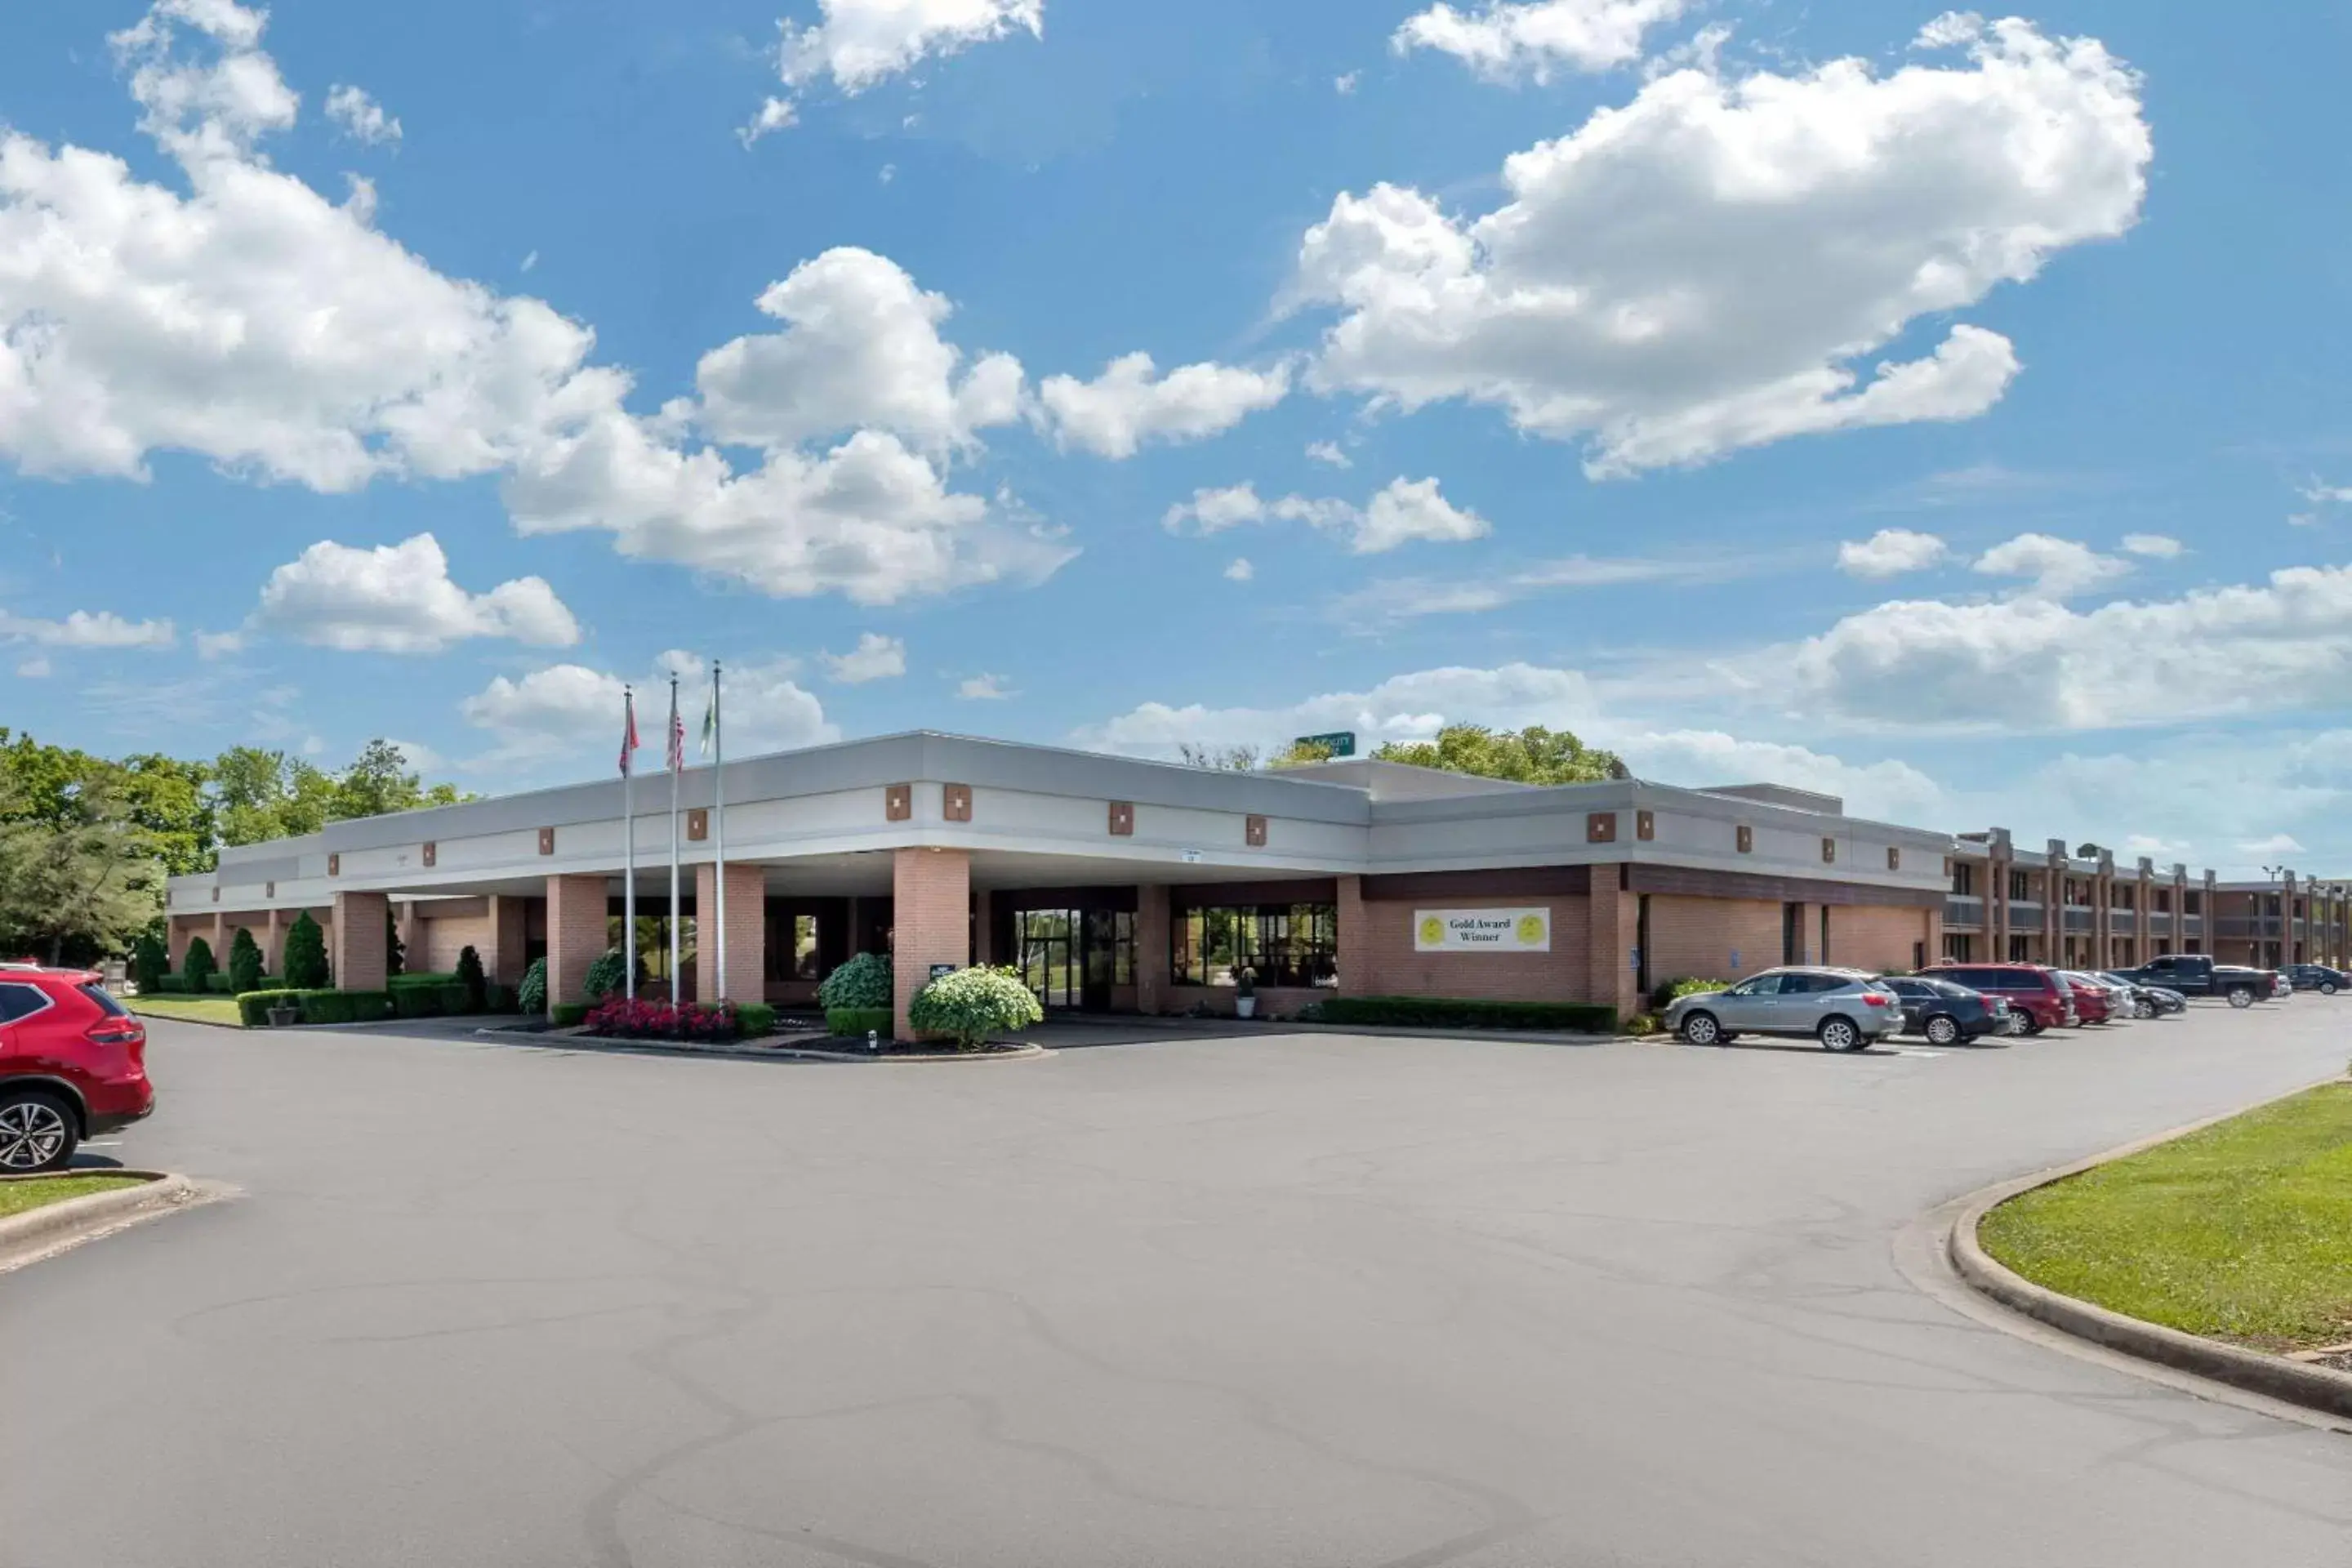 Property Building in Quality Inn Exit 4 Clarksville